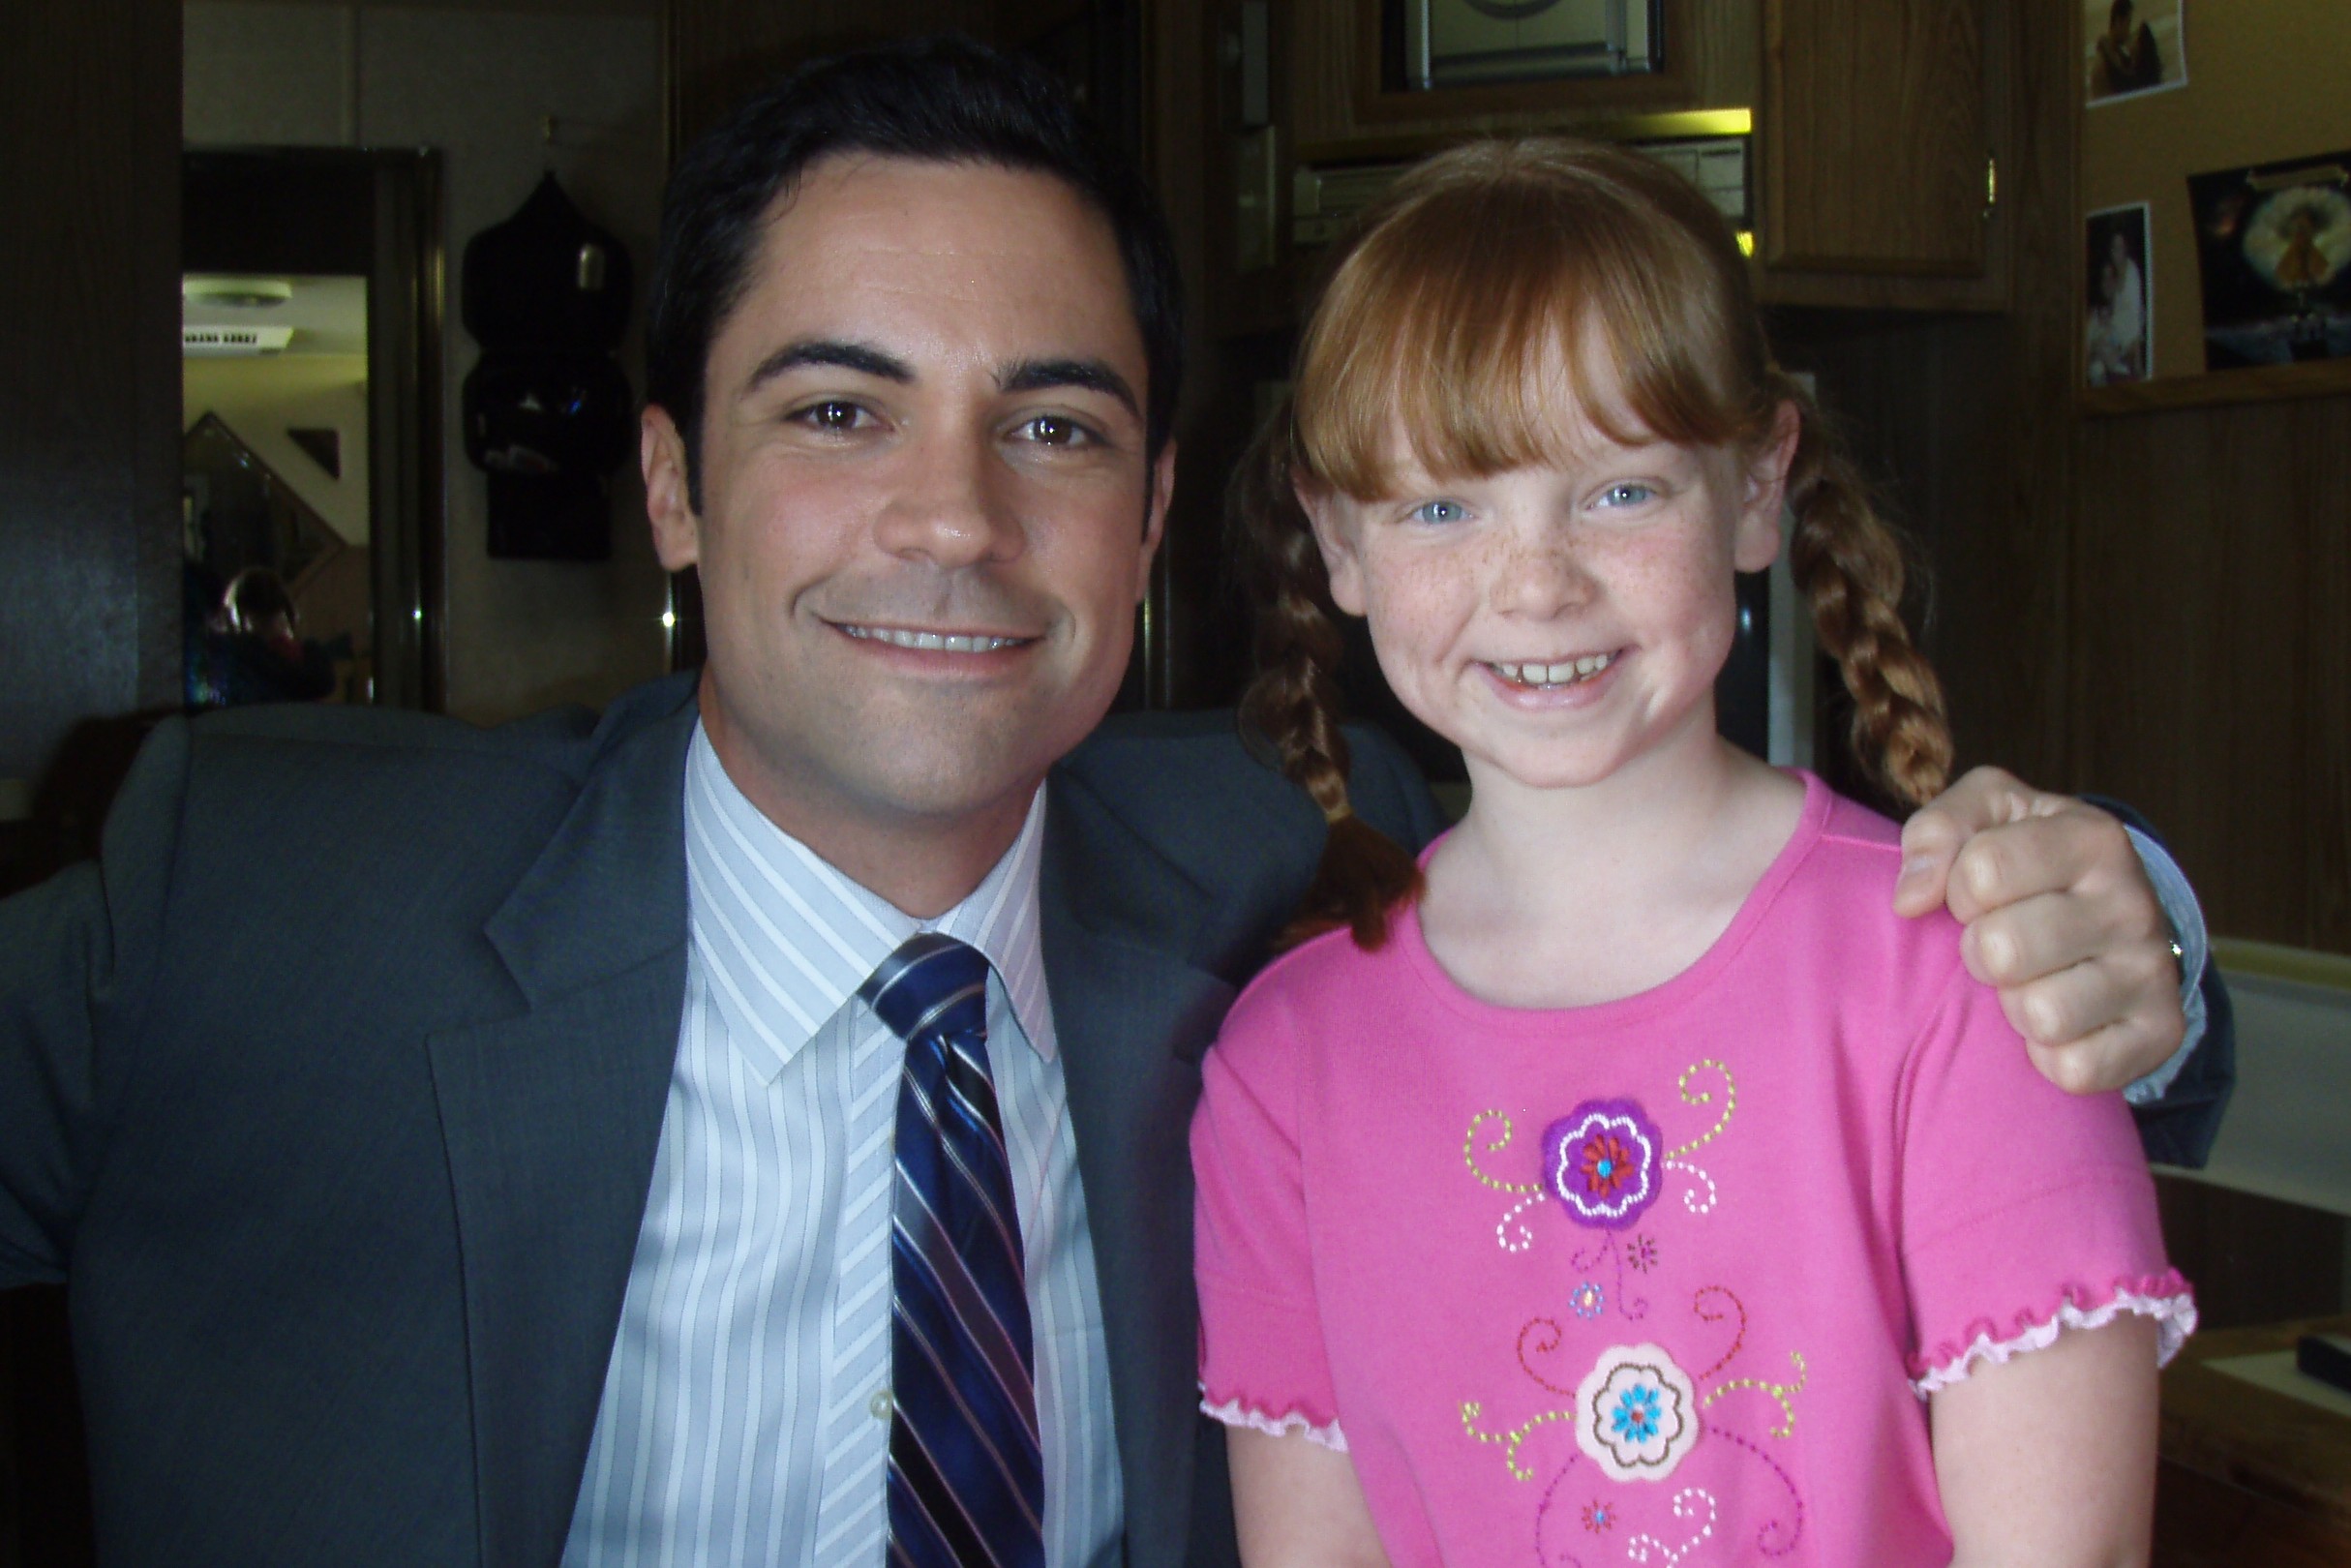 Kaleigh with Danny Pino, Detective Valens, on location in 